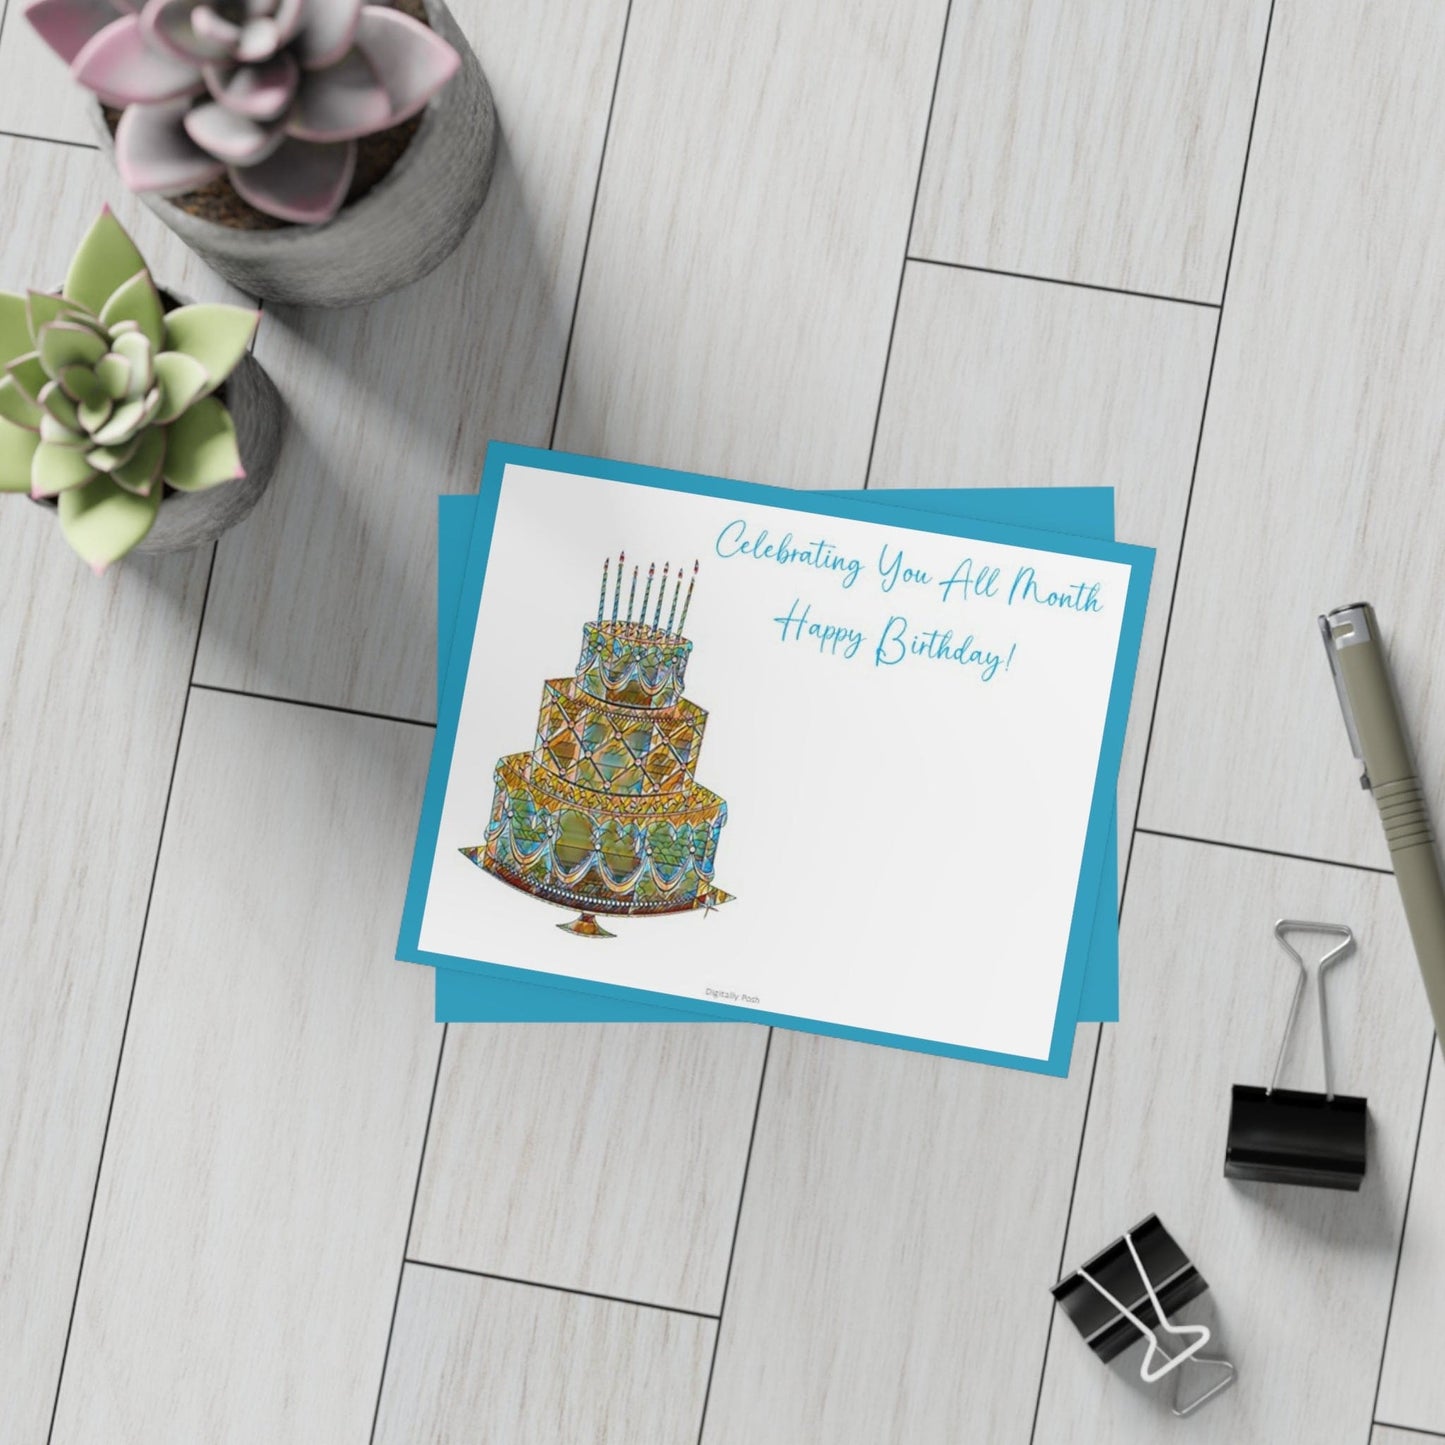 Personalized Note Card: Add a Personal Touch with Customized Stationery for Every Occasion. Celebrating You Notecard Bundles (envelopes included)